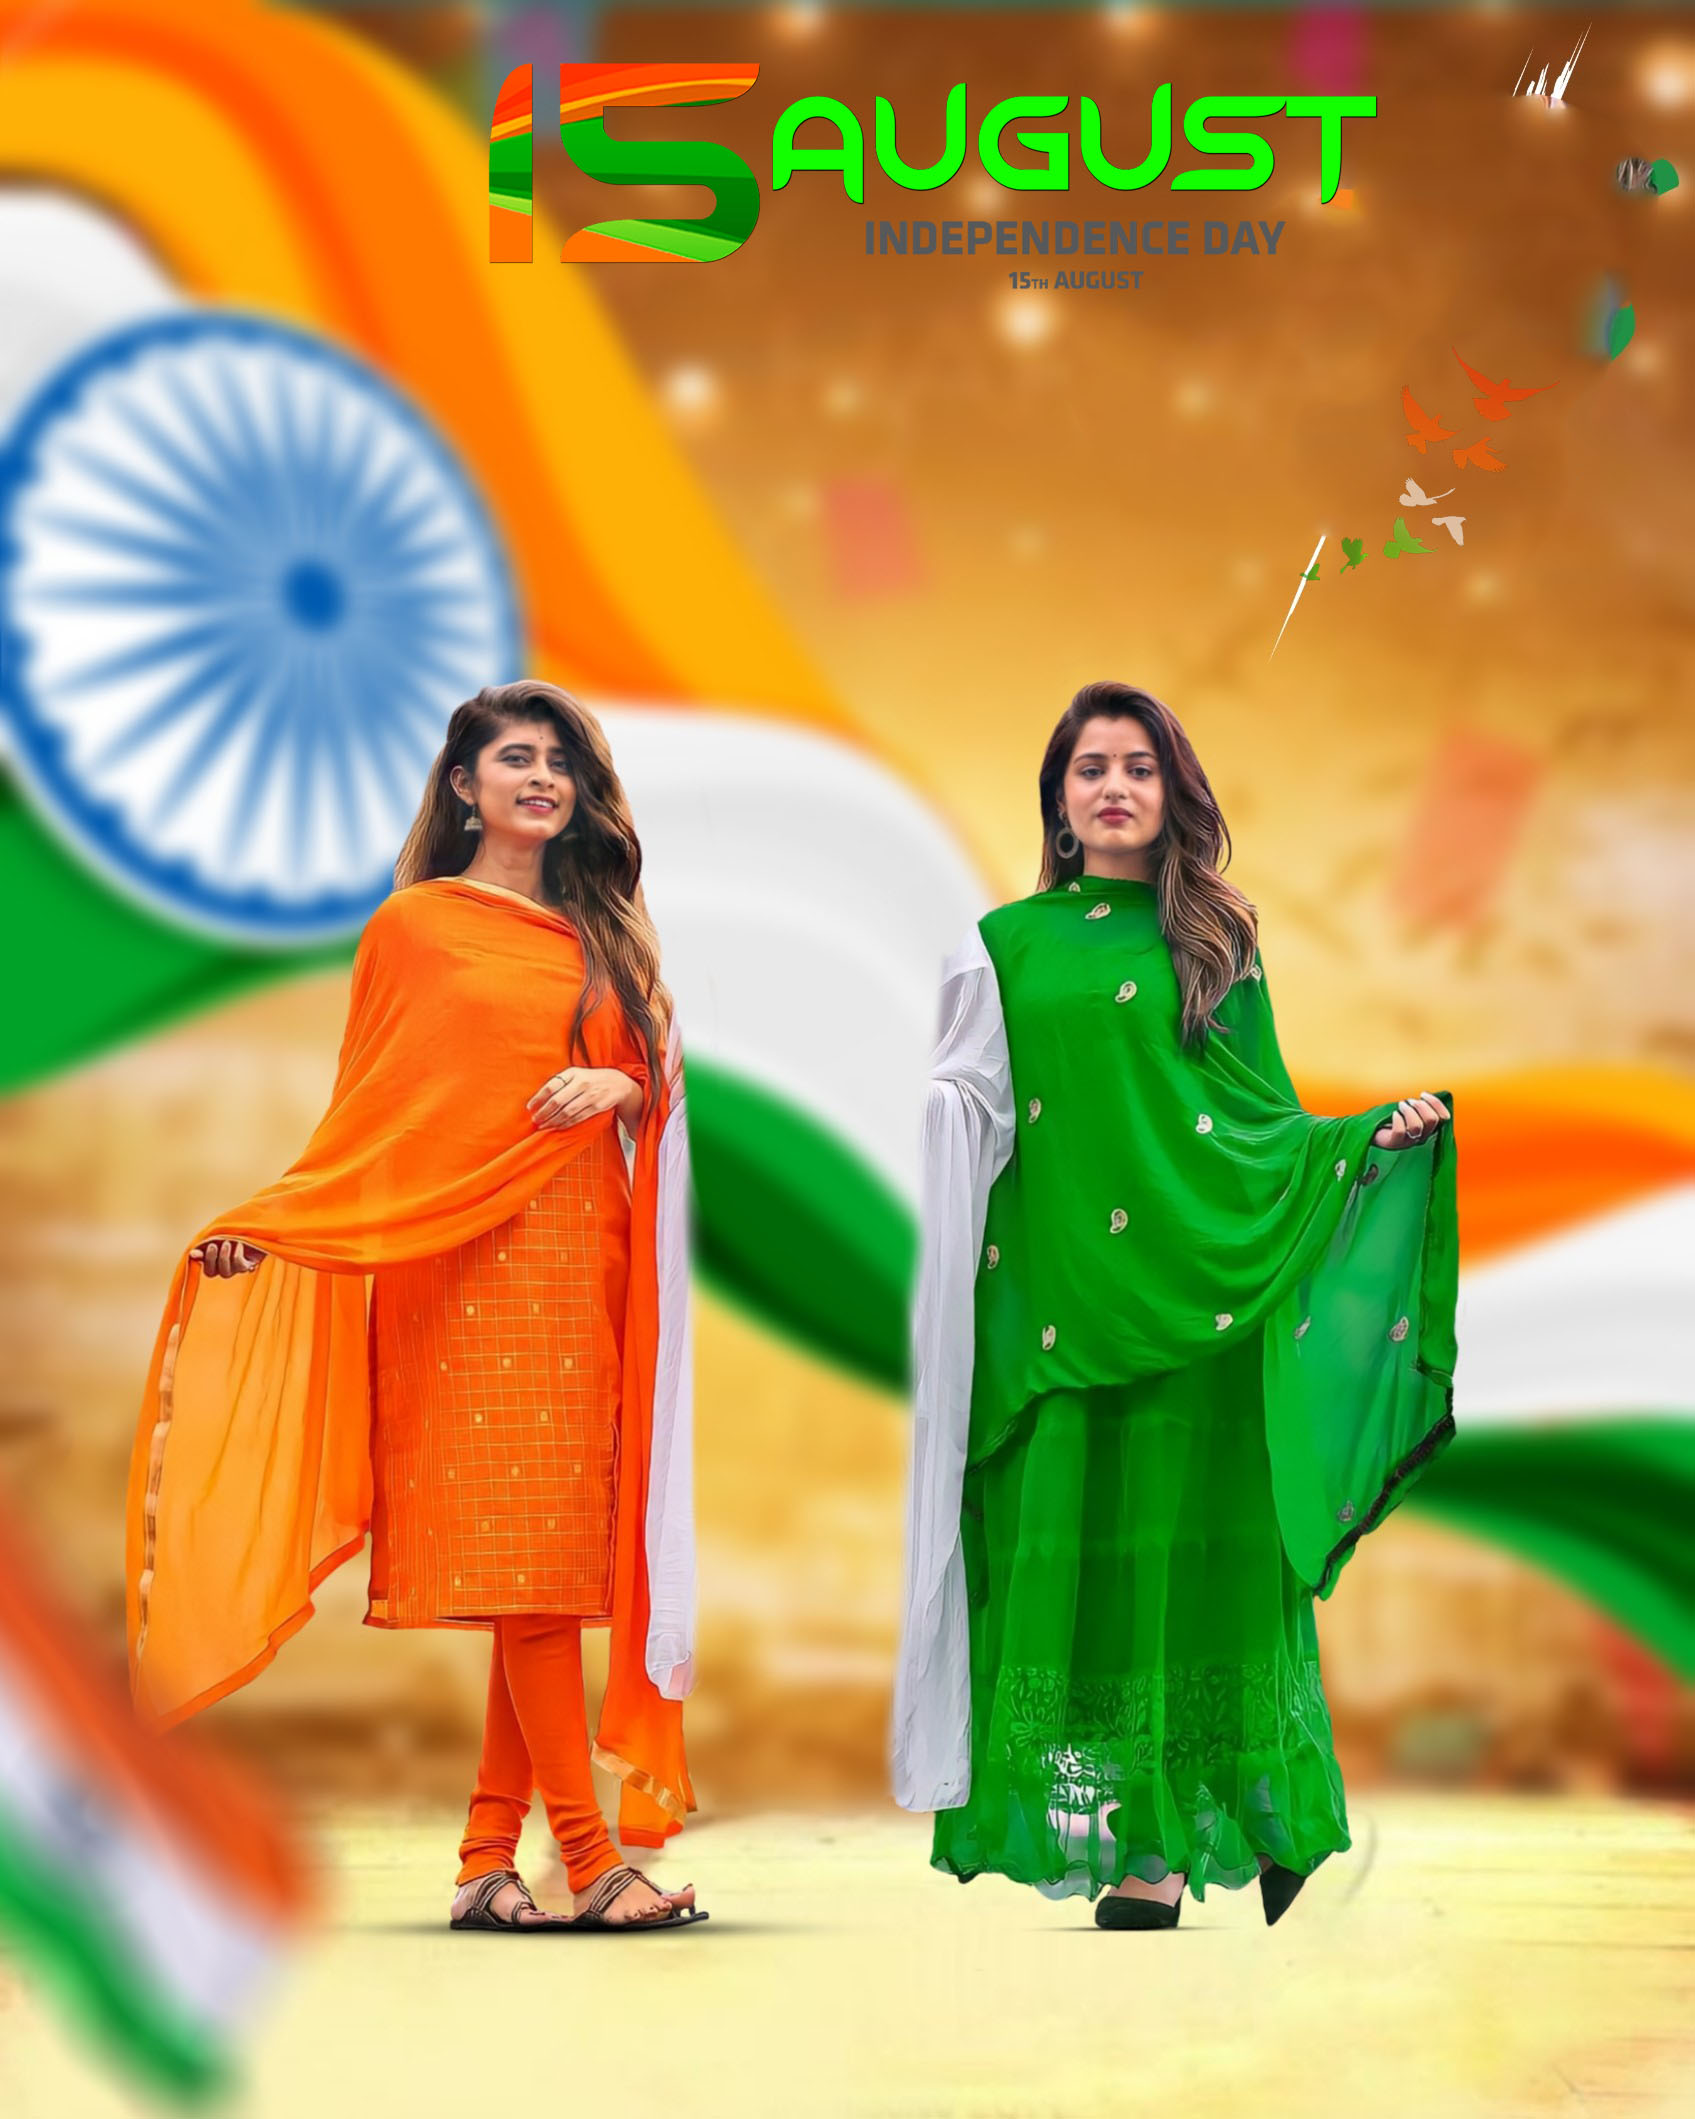 Indipendent Day Photo Editing Concept Background | 15 August Background Hd  | Editing background, Background, Photo pose for man